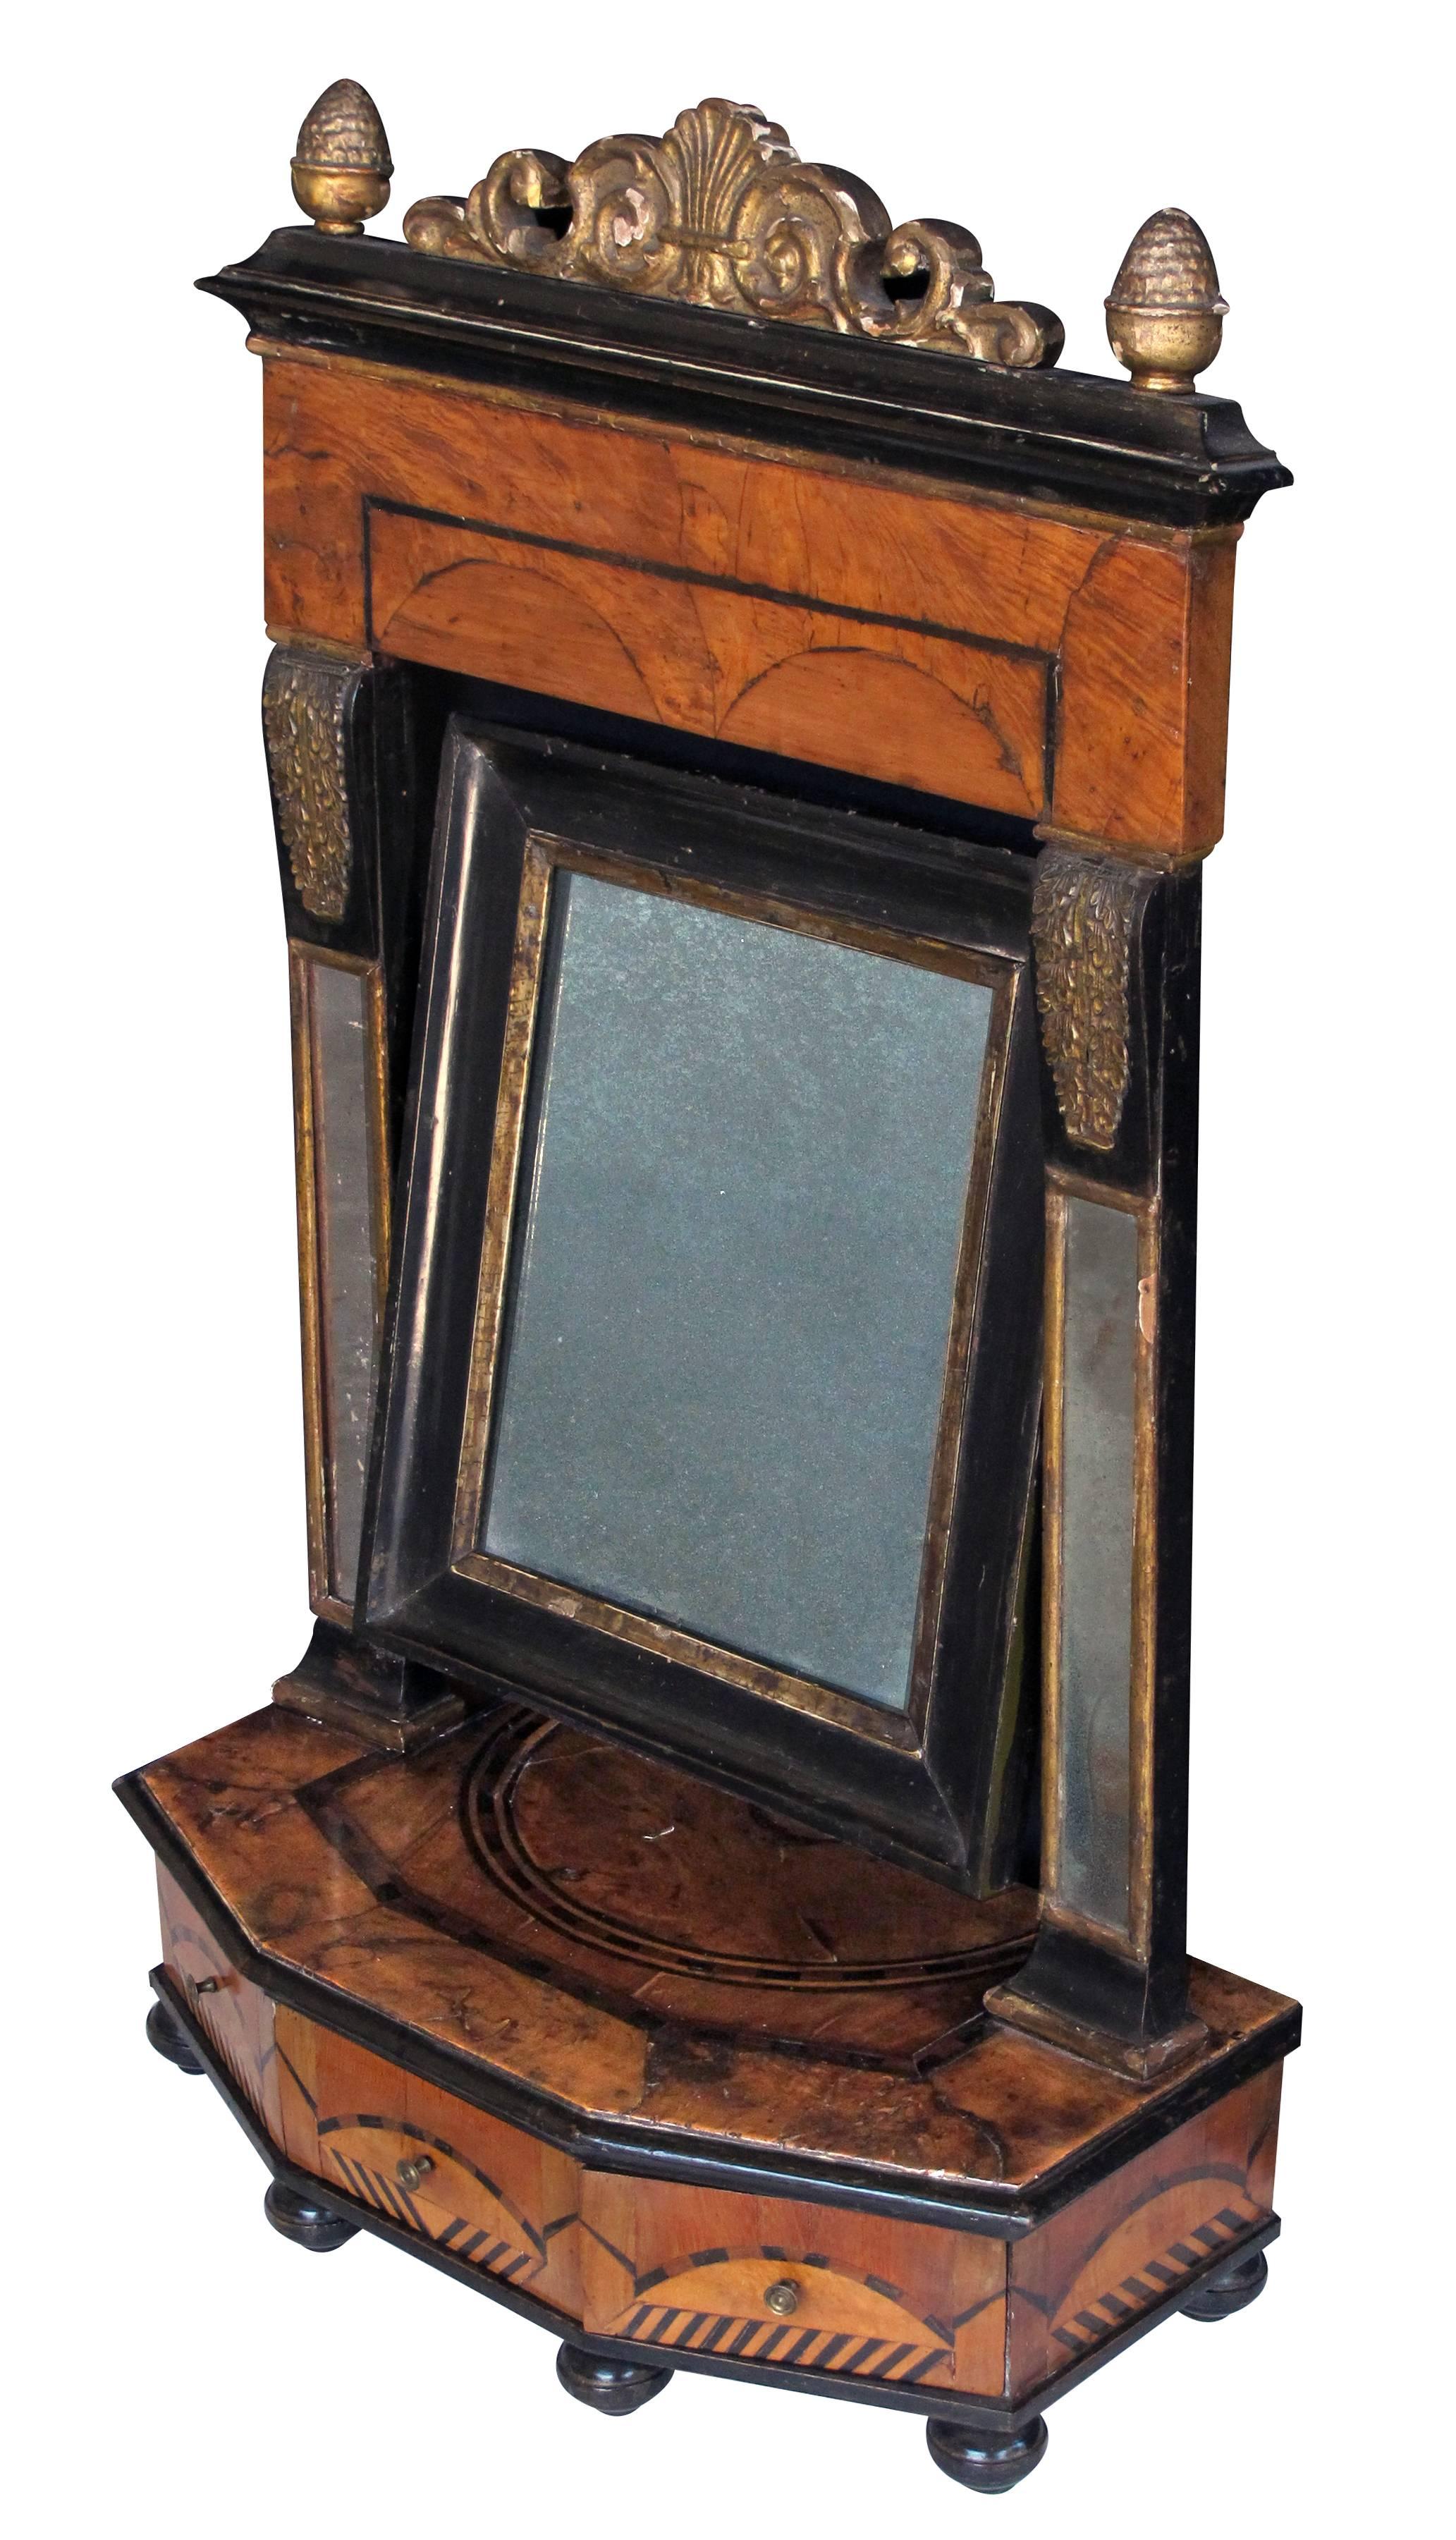 A rare and richly patinated Italian burl walnut inlaid three-drawer dressing mirror; the original hinged plate flanked by mirrored stiles above a rectangular canted body fitted with three drawers; great for a man's dressing room for cufflinks,